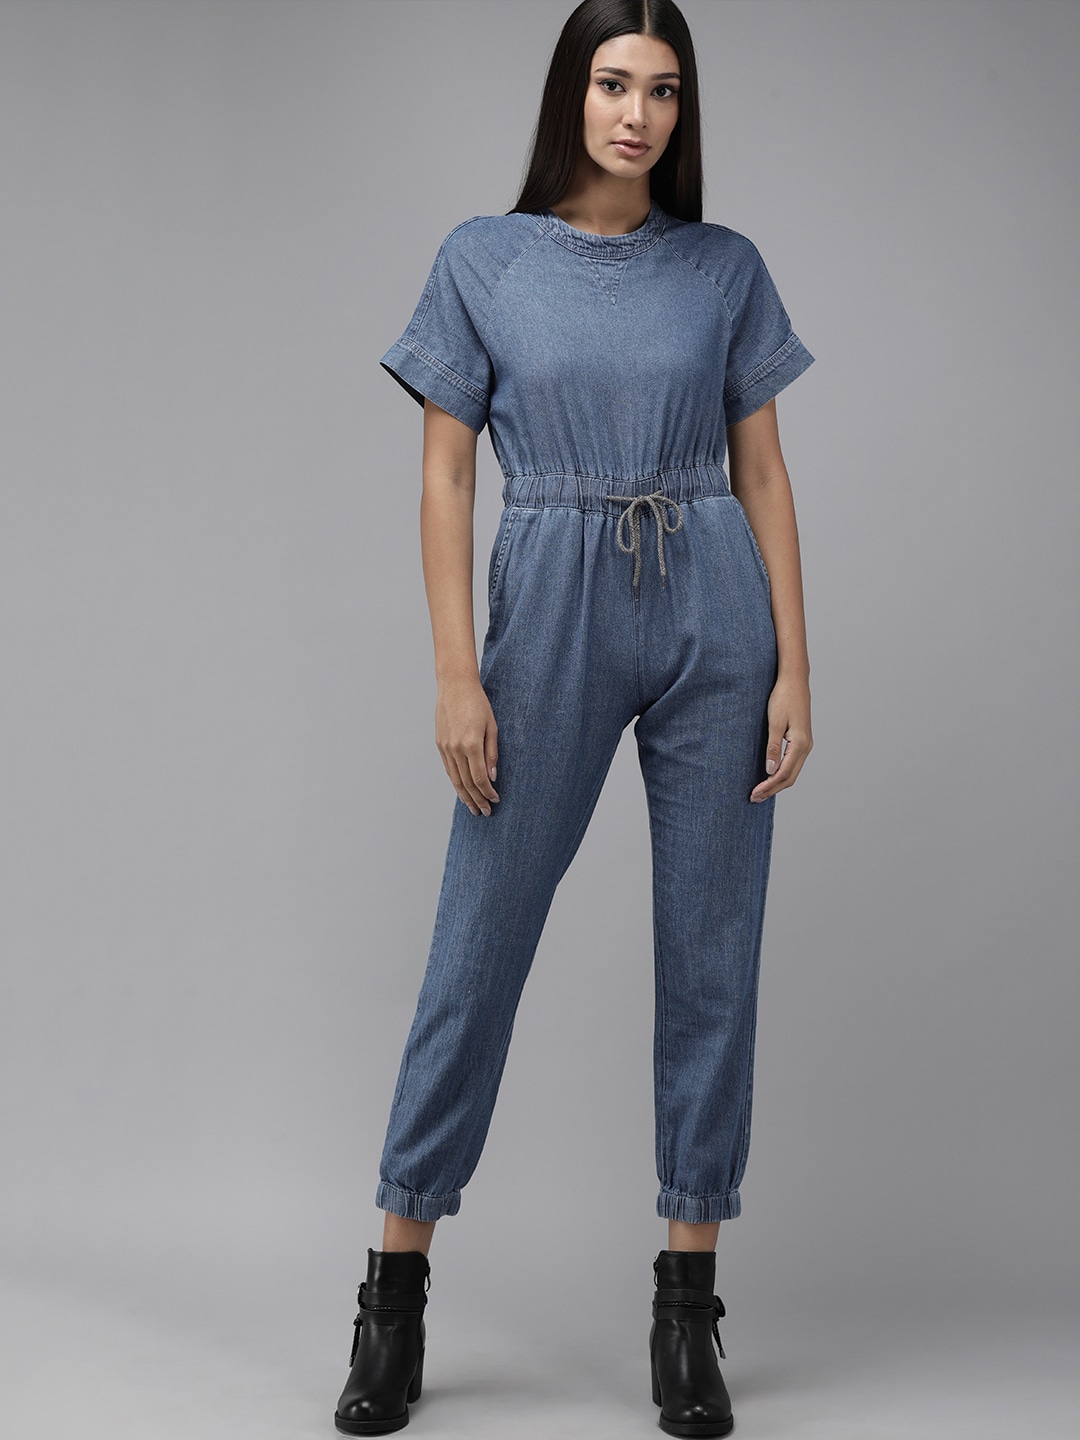 The Roadster Lifestyle Co Blue Jogger Fit Basic Denim Cropped Jumpsuit with Waist Tie-Ups Price in India